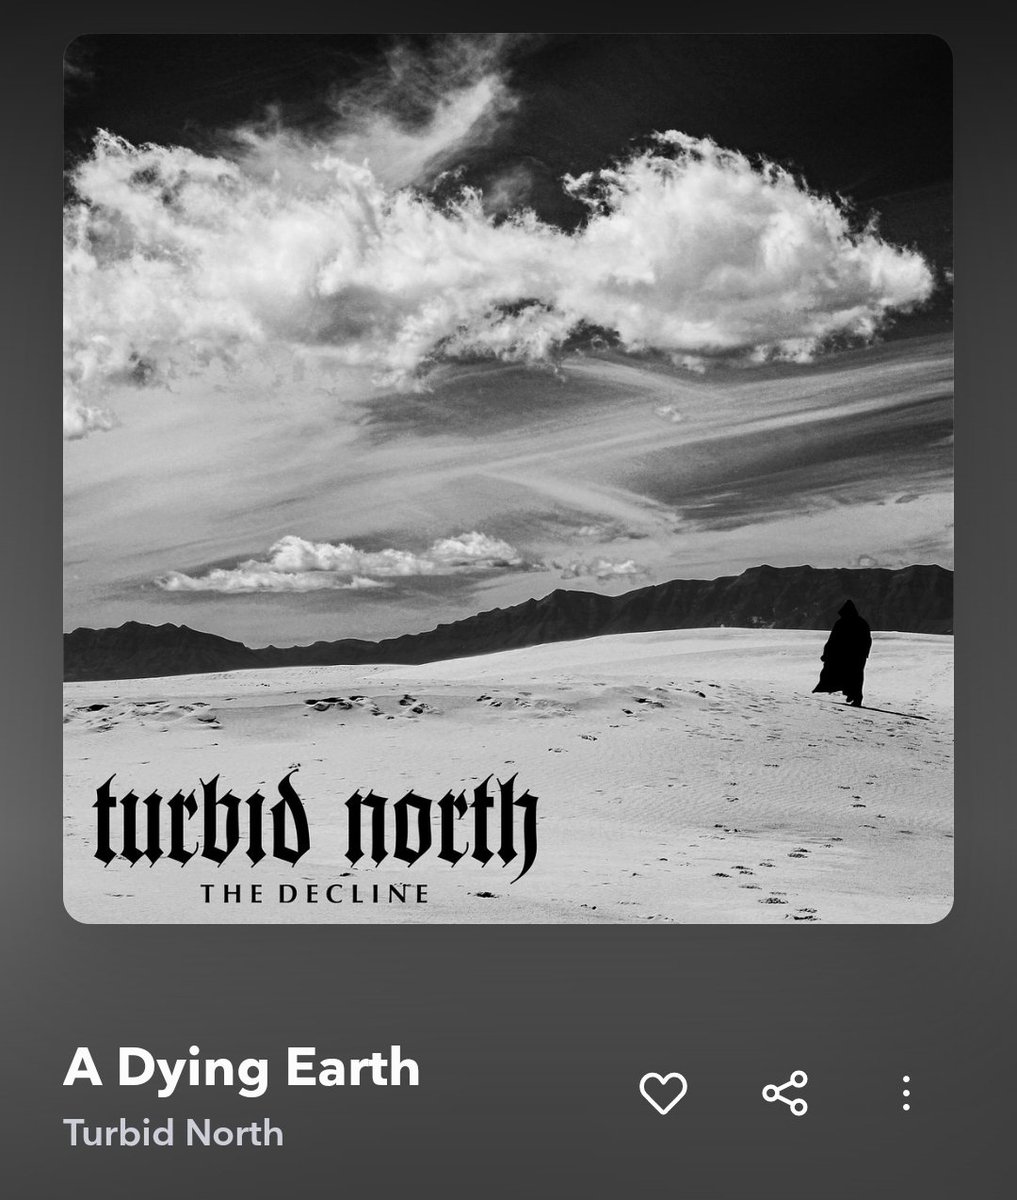 Seriously, this @turbidnorth album is kicking my ass off!